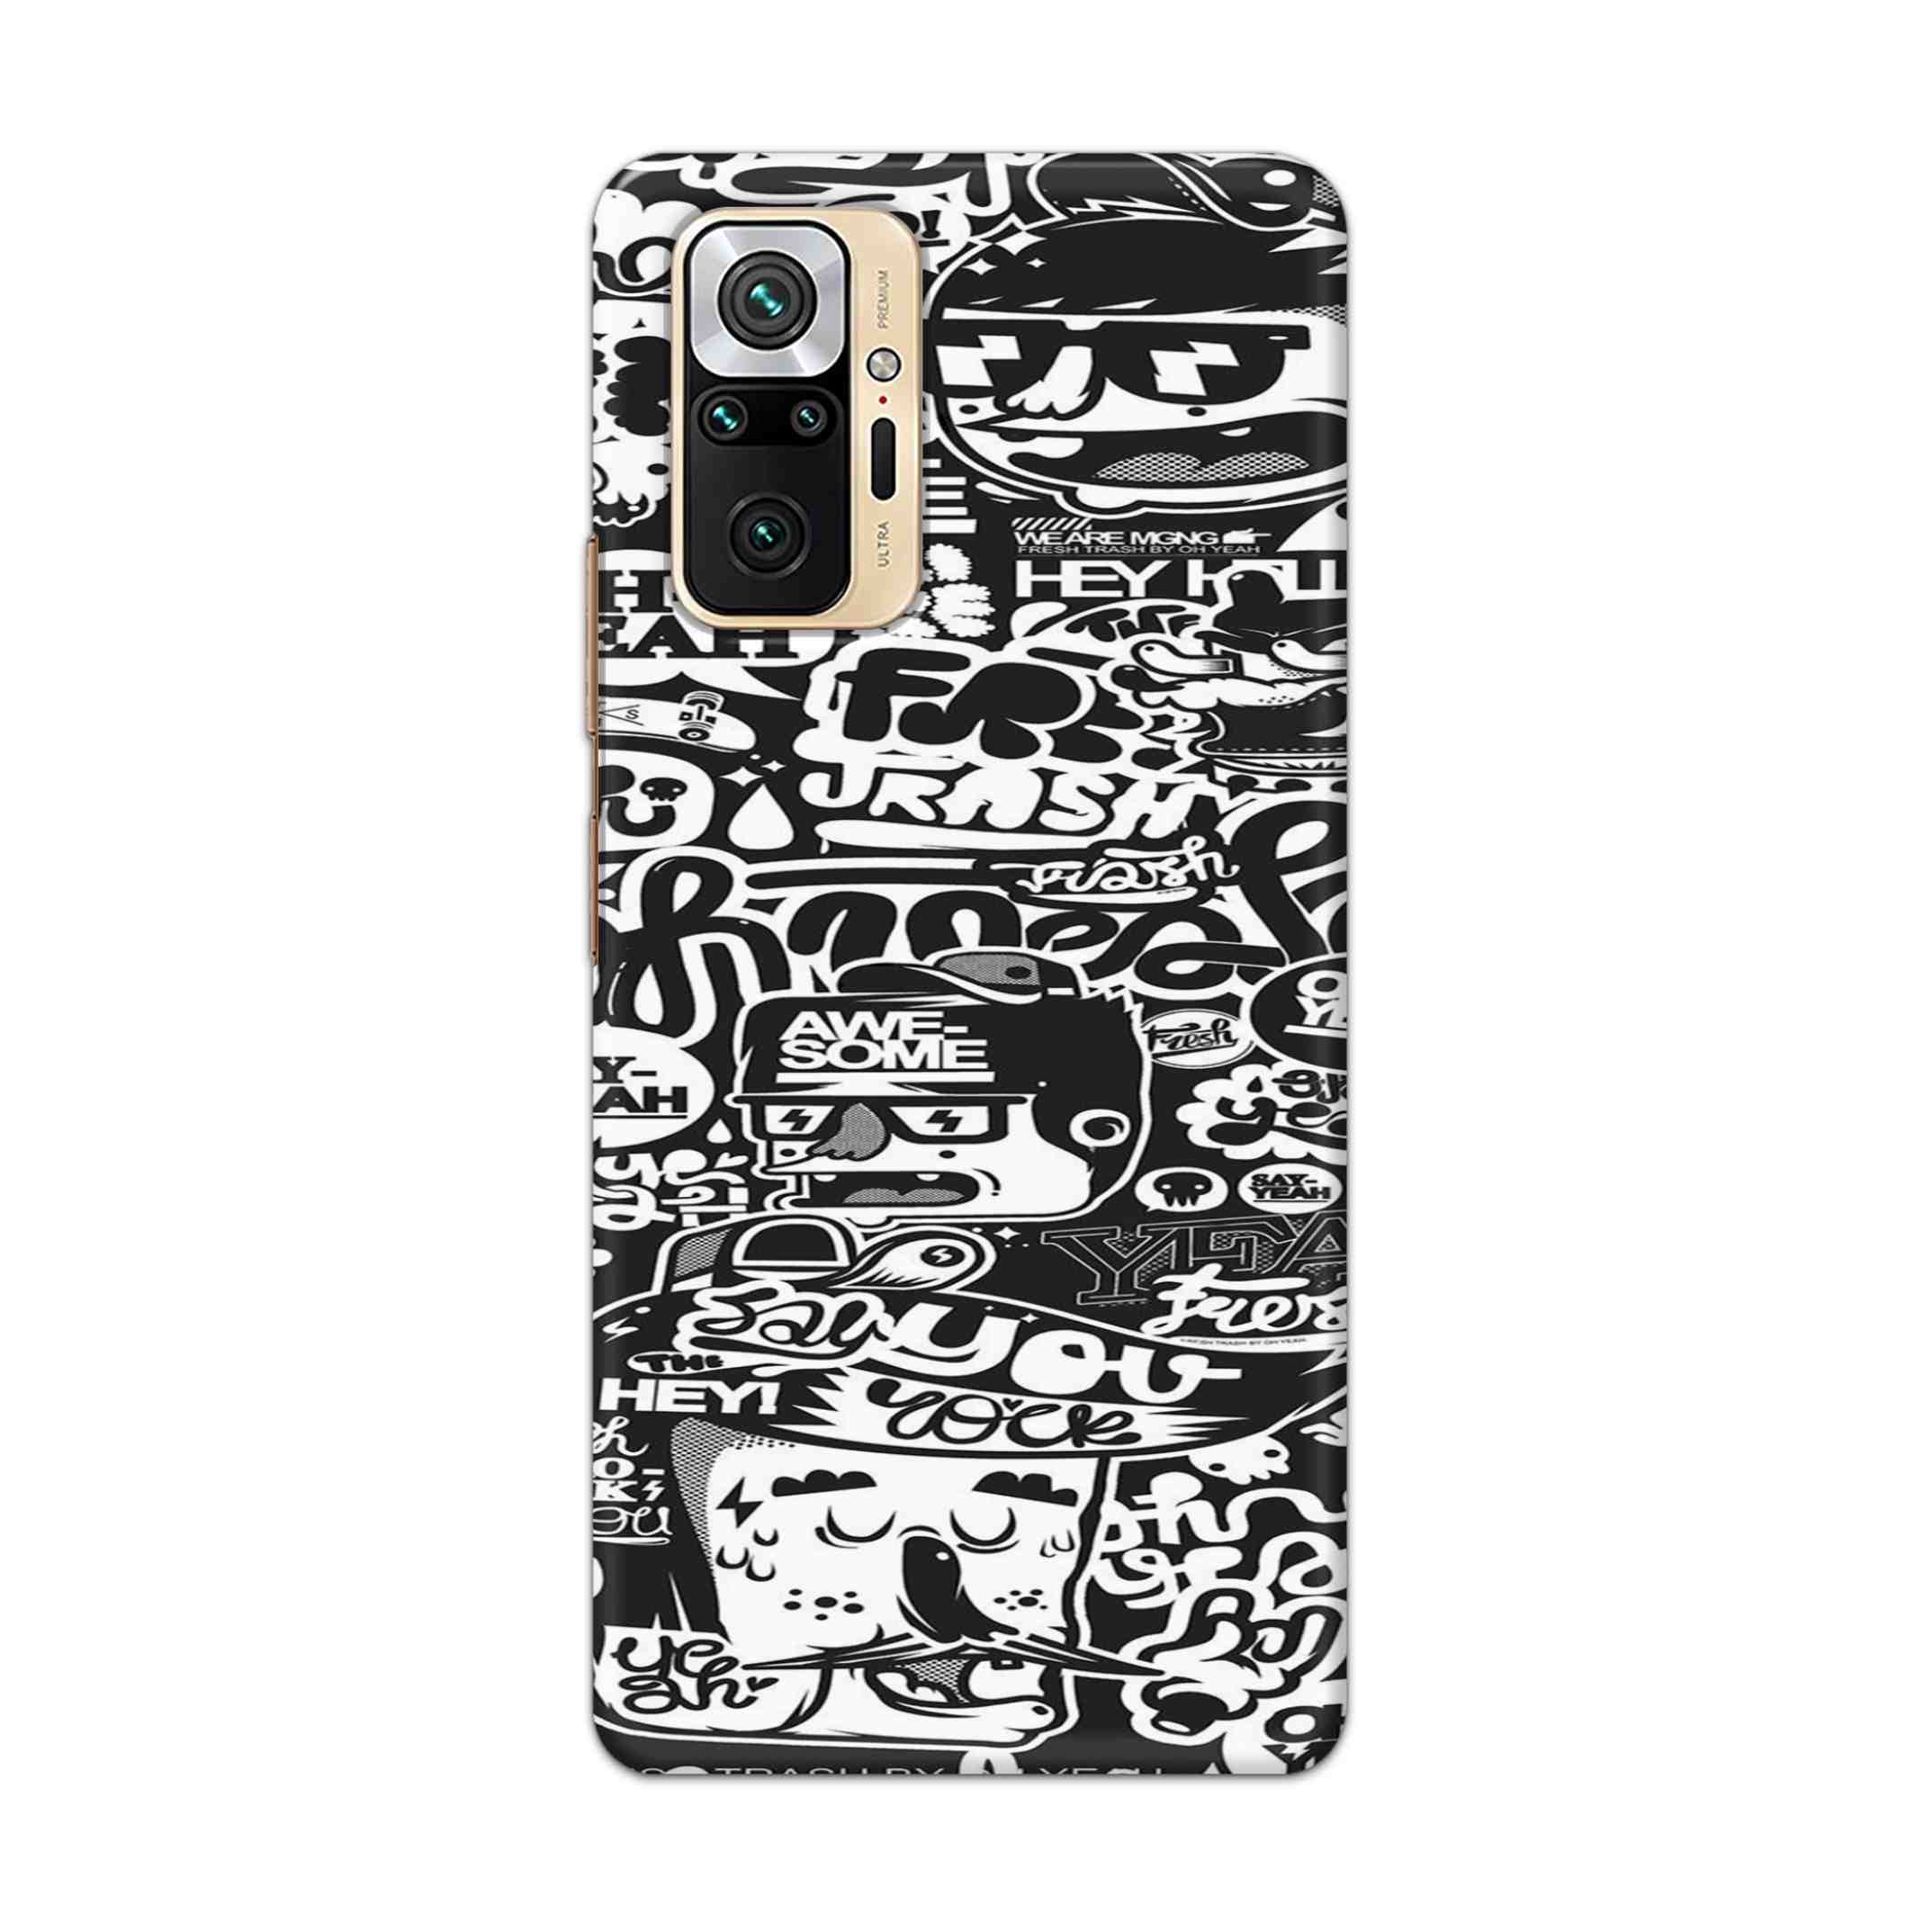 Buy Awesome Hard Back Mobile Phone Case Cover For Redmi Note 10 Pro Max Online